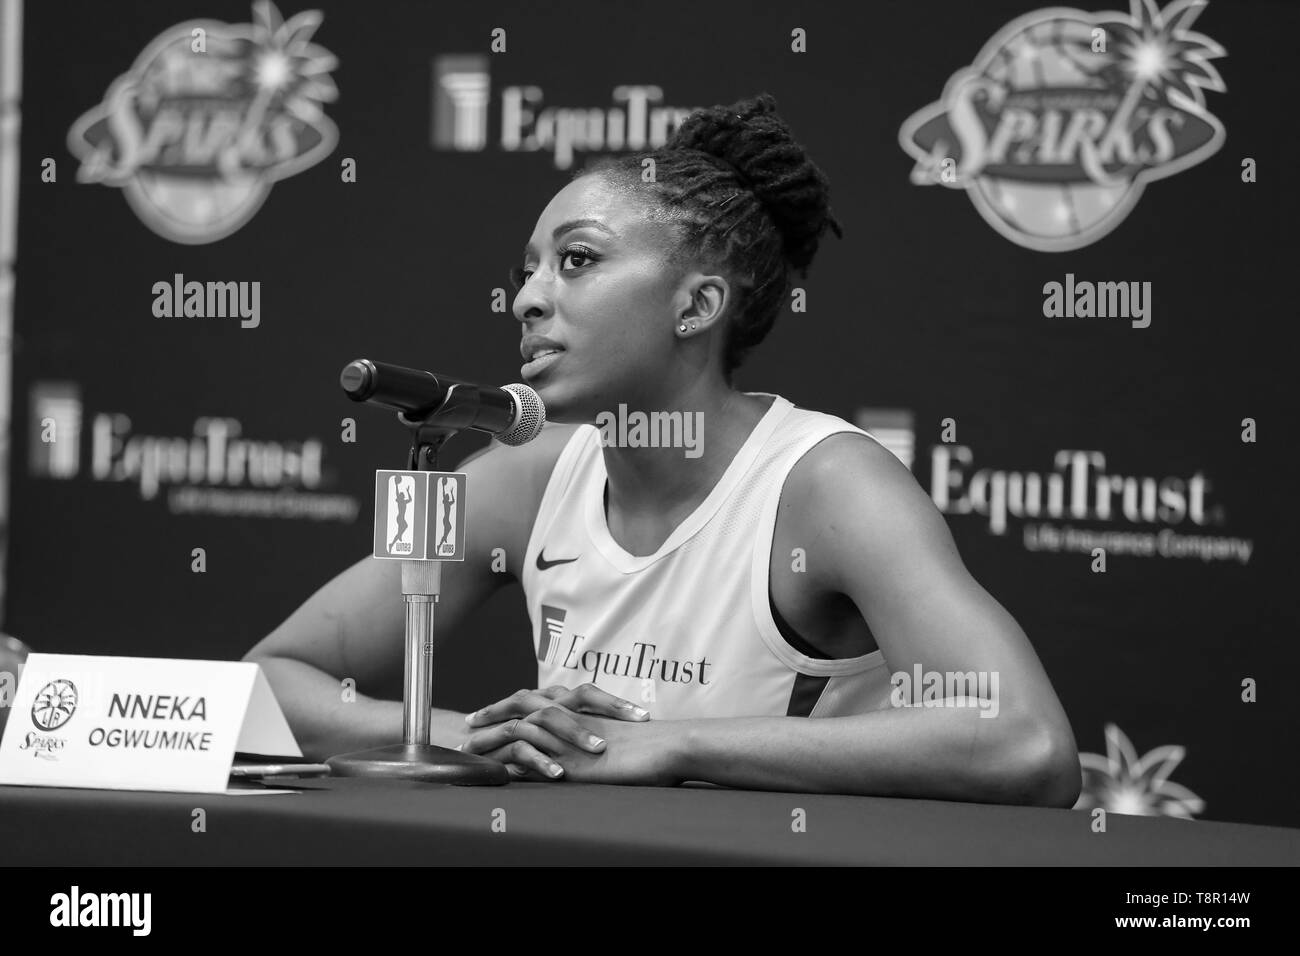 WNBA 2019: Los Angeles Sparks forward Nneka Ogwumike #30 during Los Angeles Sparks Media Day May 14, 2019 at Los Angeles Southwest College. (Photo by Jevone Moore) Stock Photo